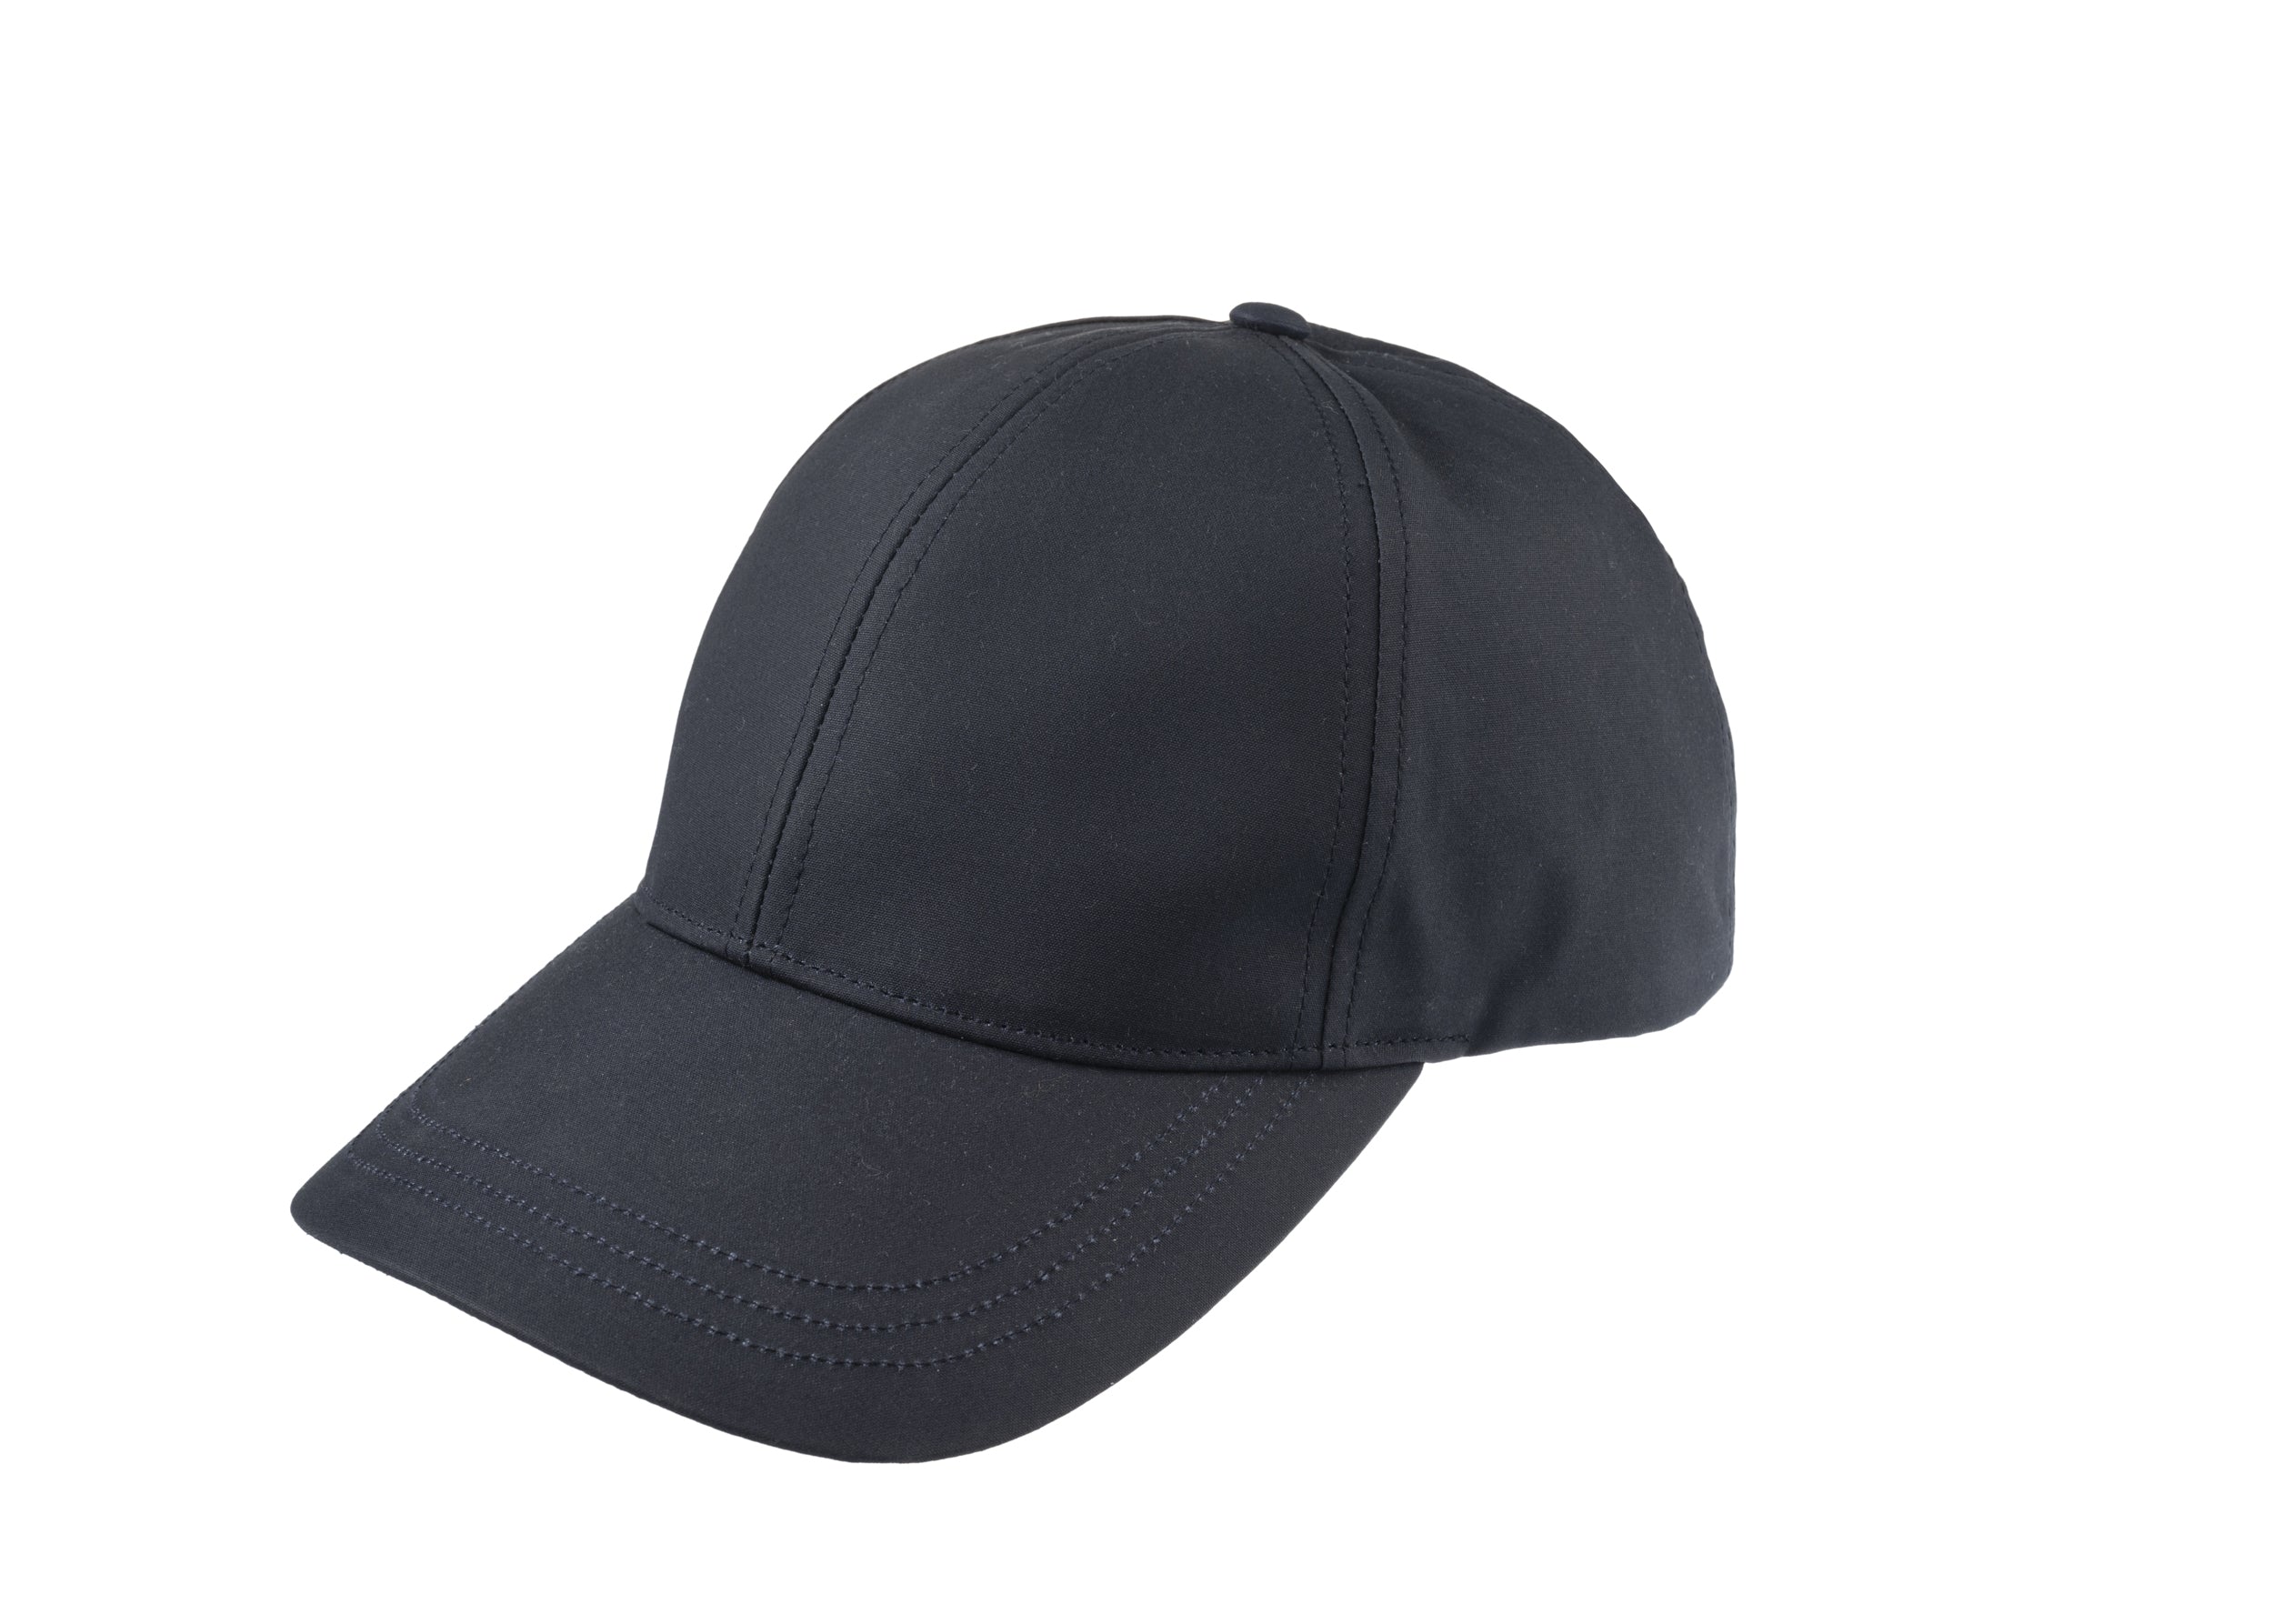 Baseball Cap cotton wax fabric with one size adjuster